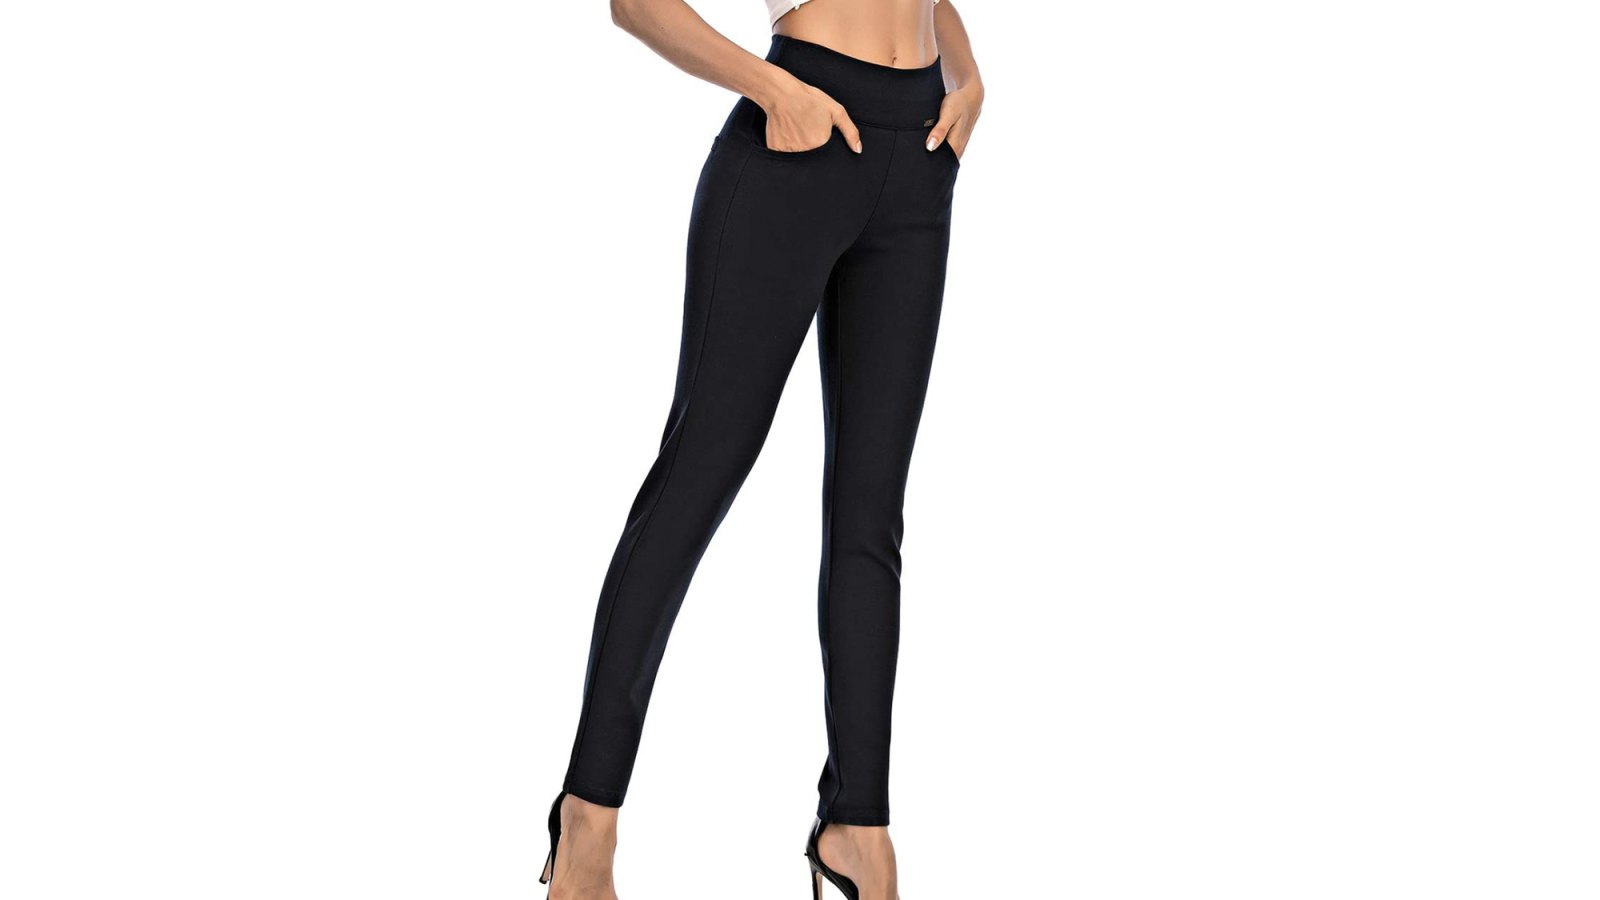 Dress Pants for Women Comfort Stretch Slim Fit Leg Skinny High Waist Pull  on Pants Trousers with Pockets for Work Jogger